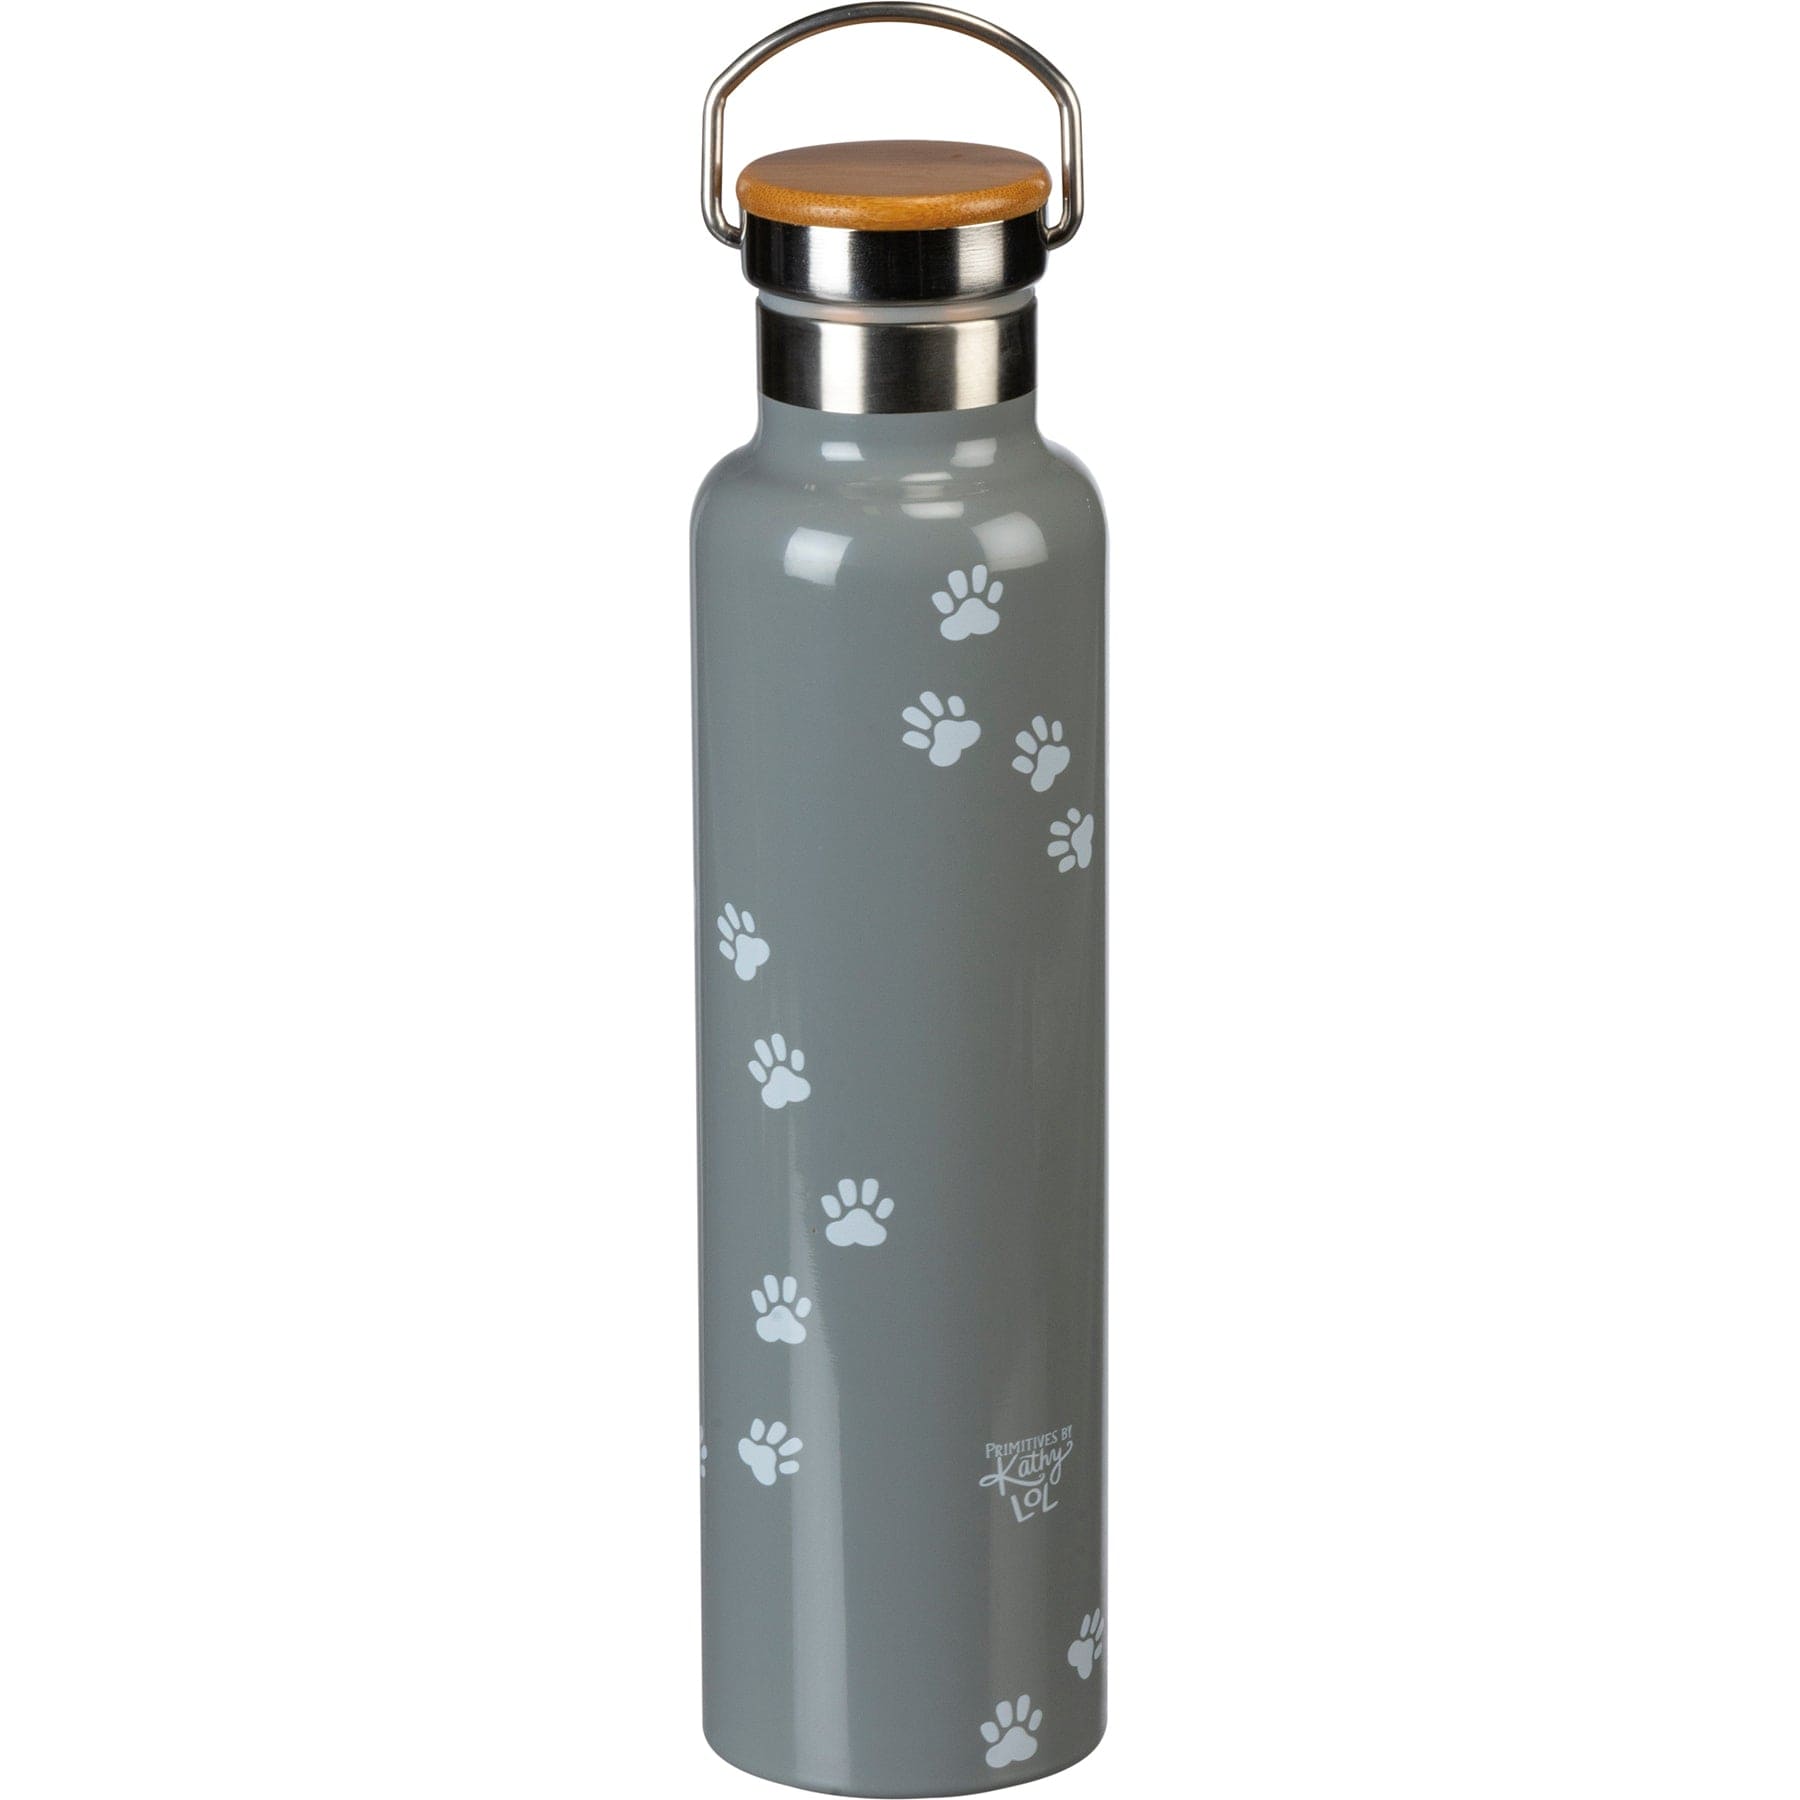 Drinkware Insulated Bottle - Love My Rescue PBK-105836